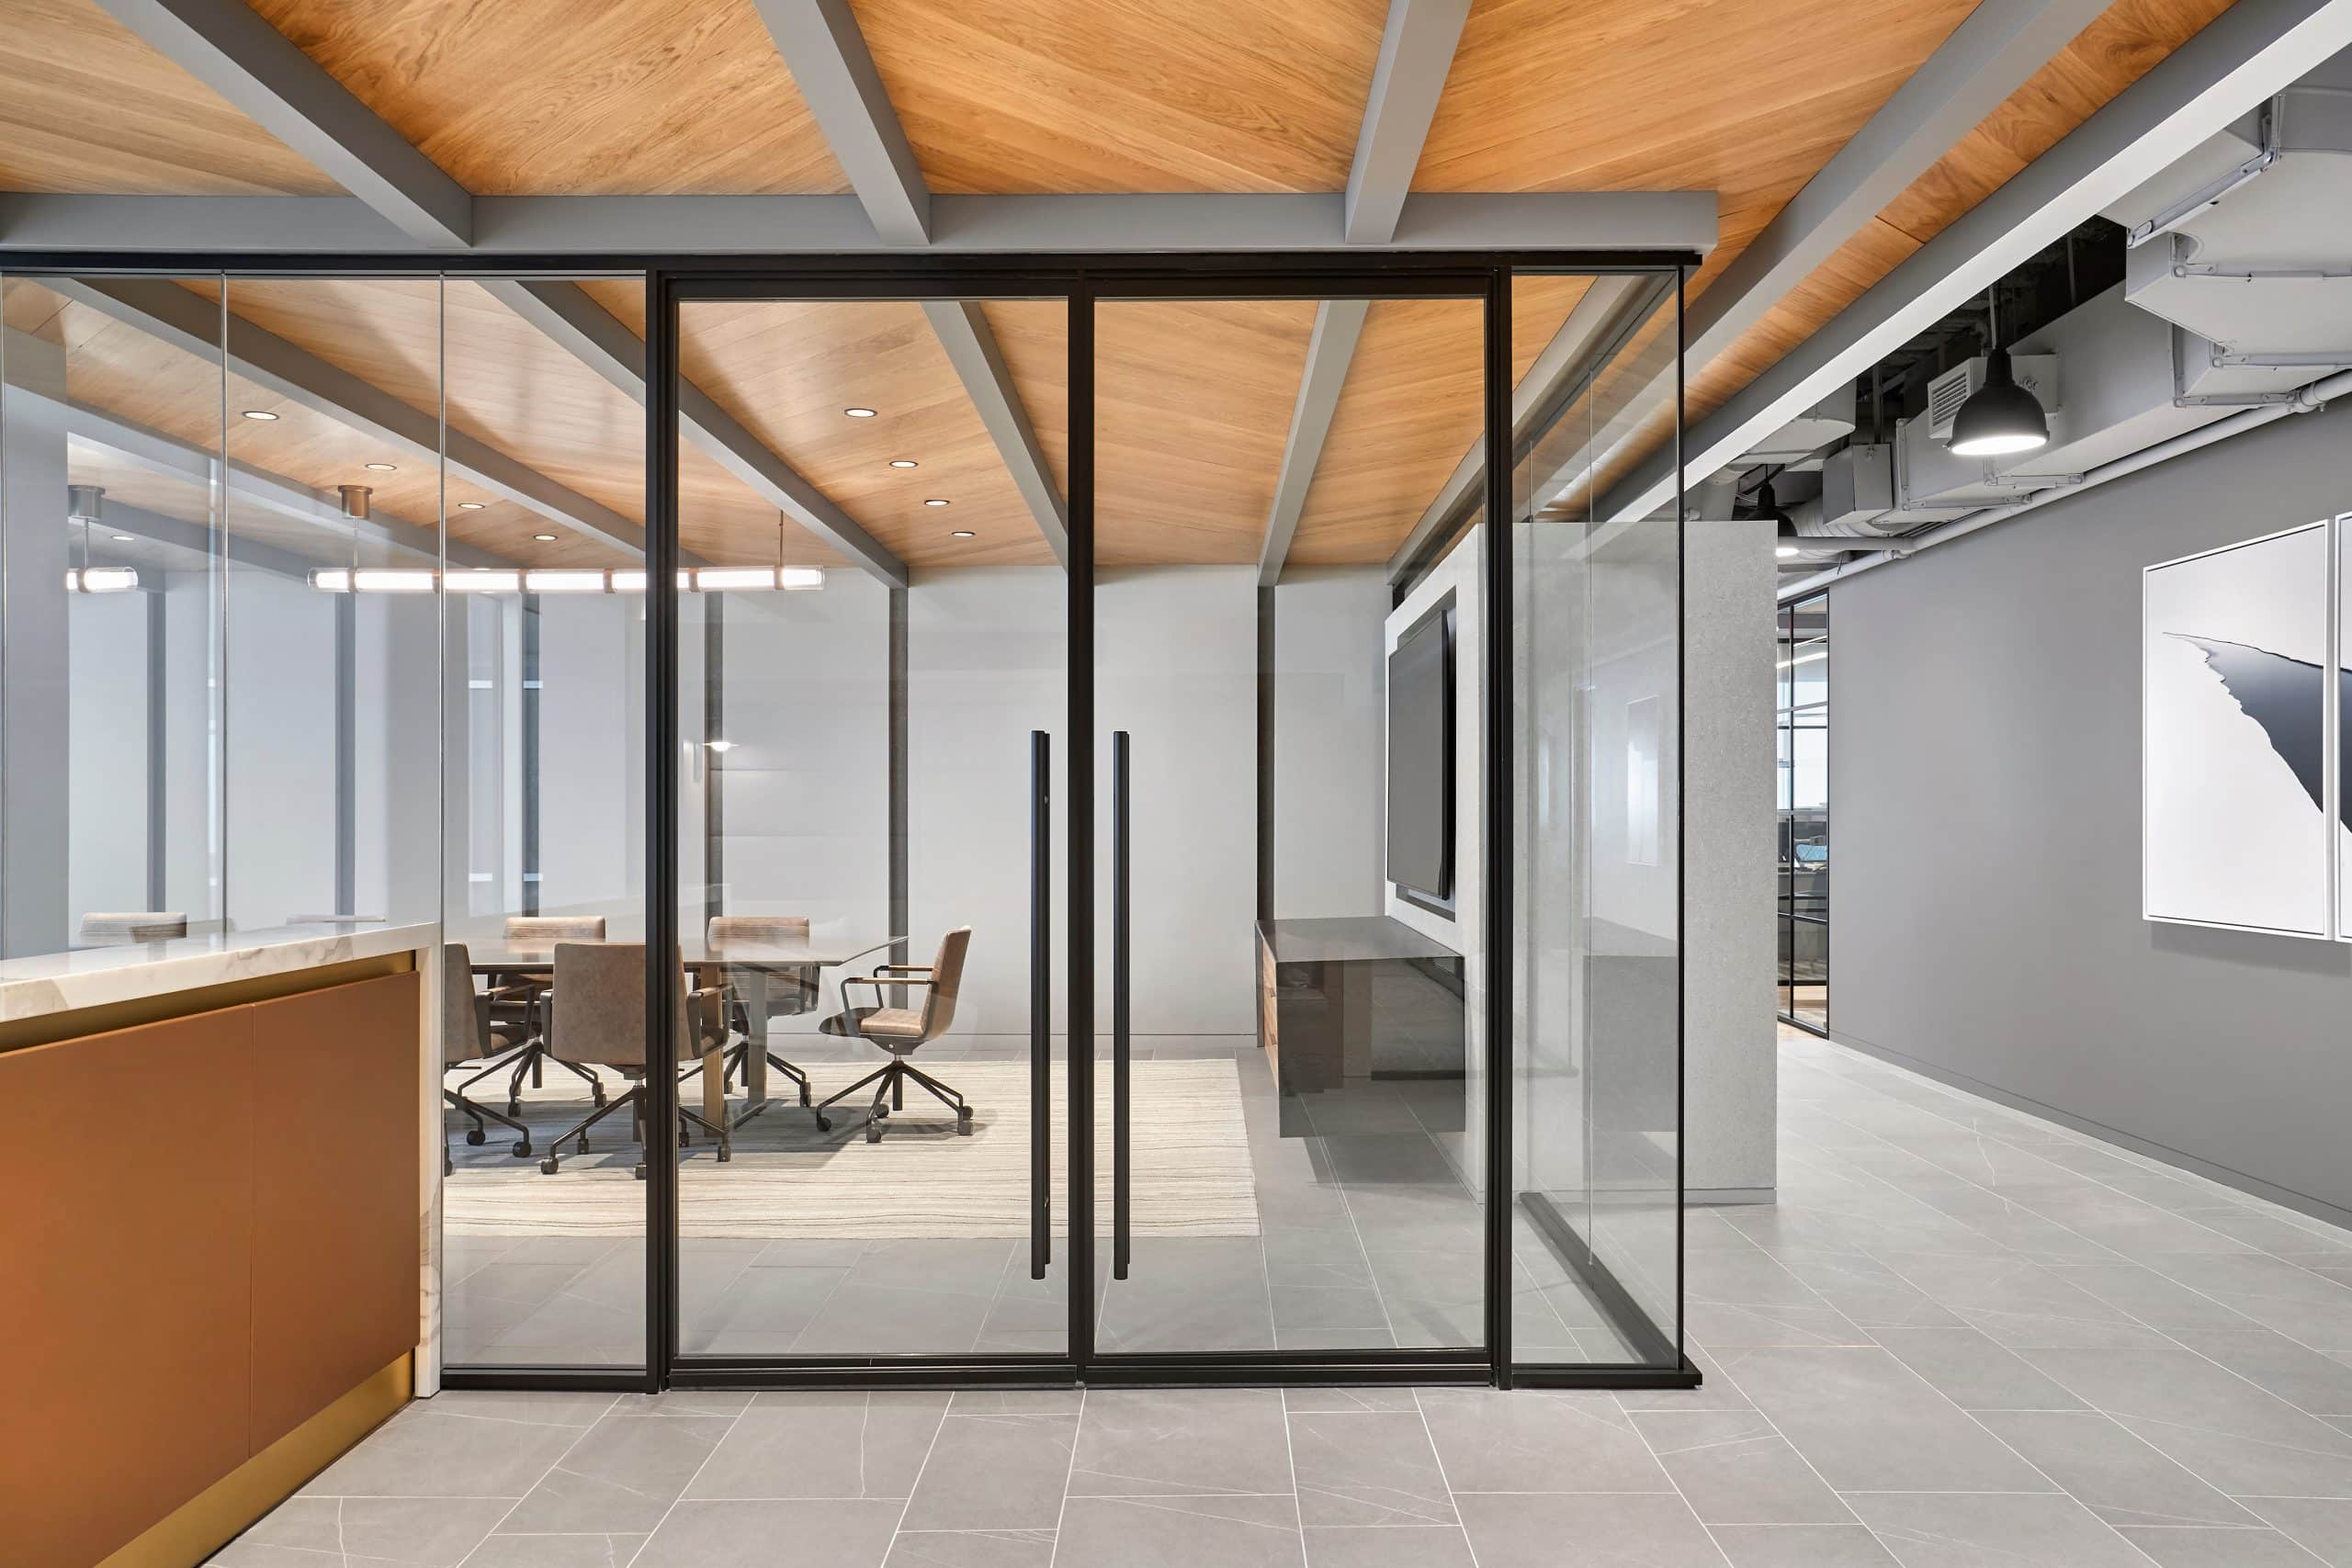 Hallway of offices designed with Transwall One LP flexible office wall system